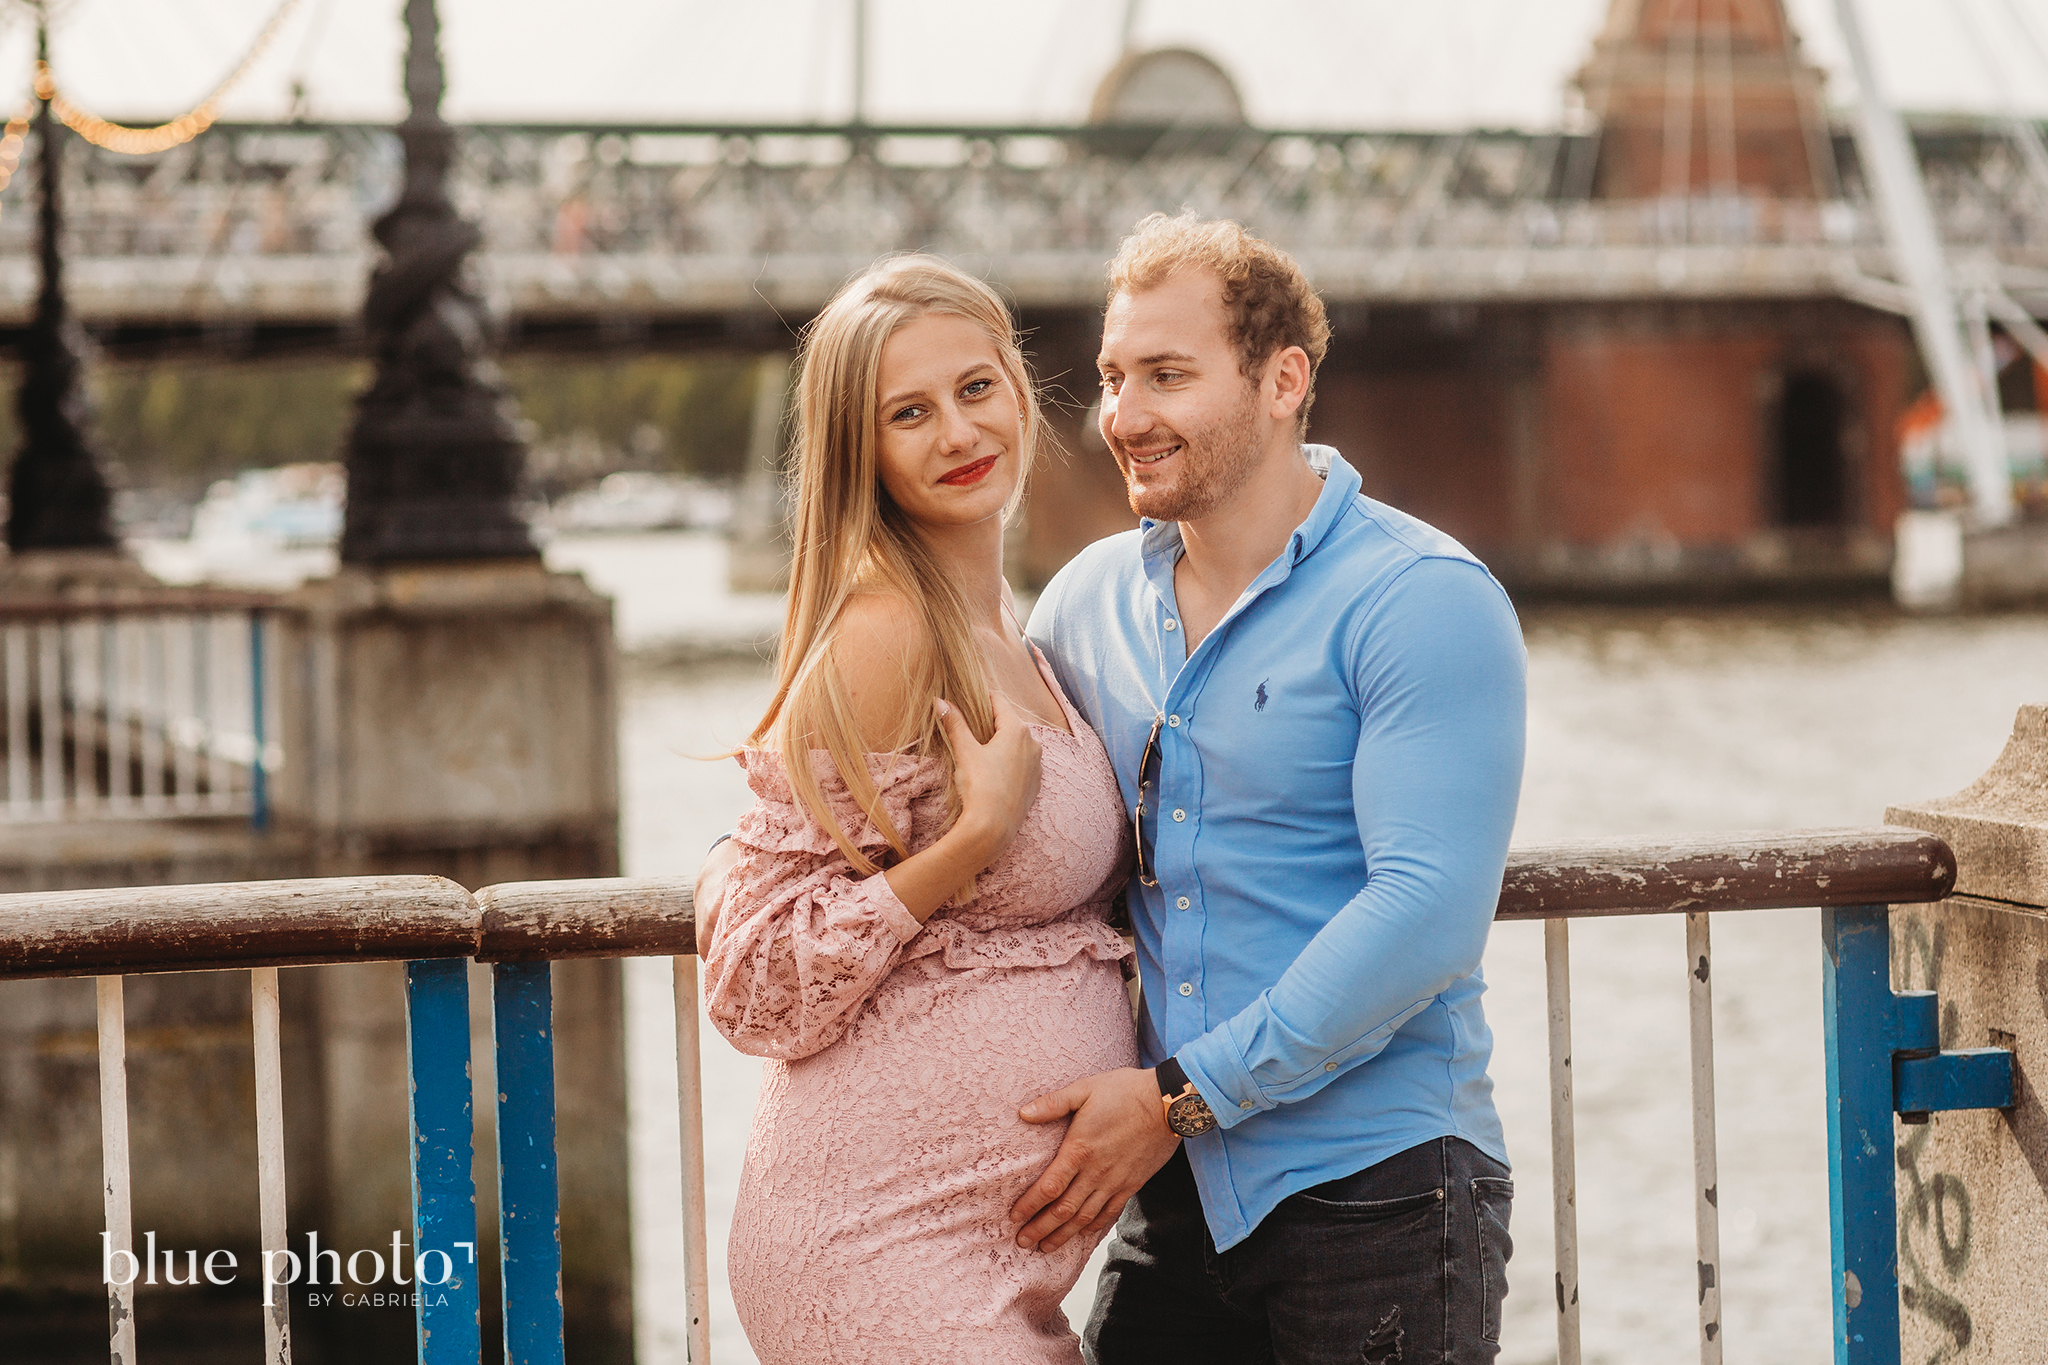 Angelika and Wojtek during their maternity session in South Bank, Central London. The couple is smiling. 